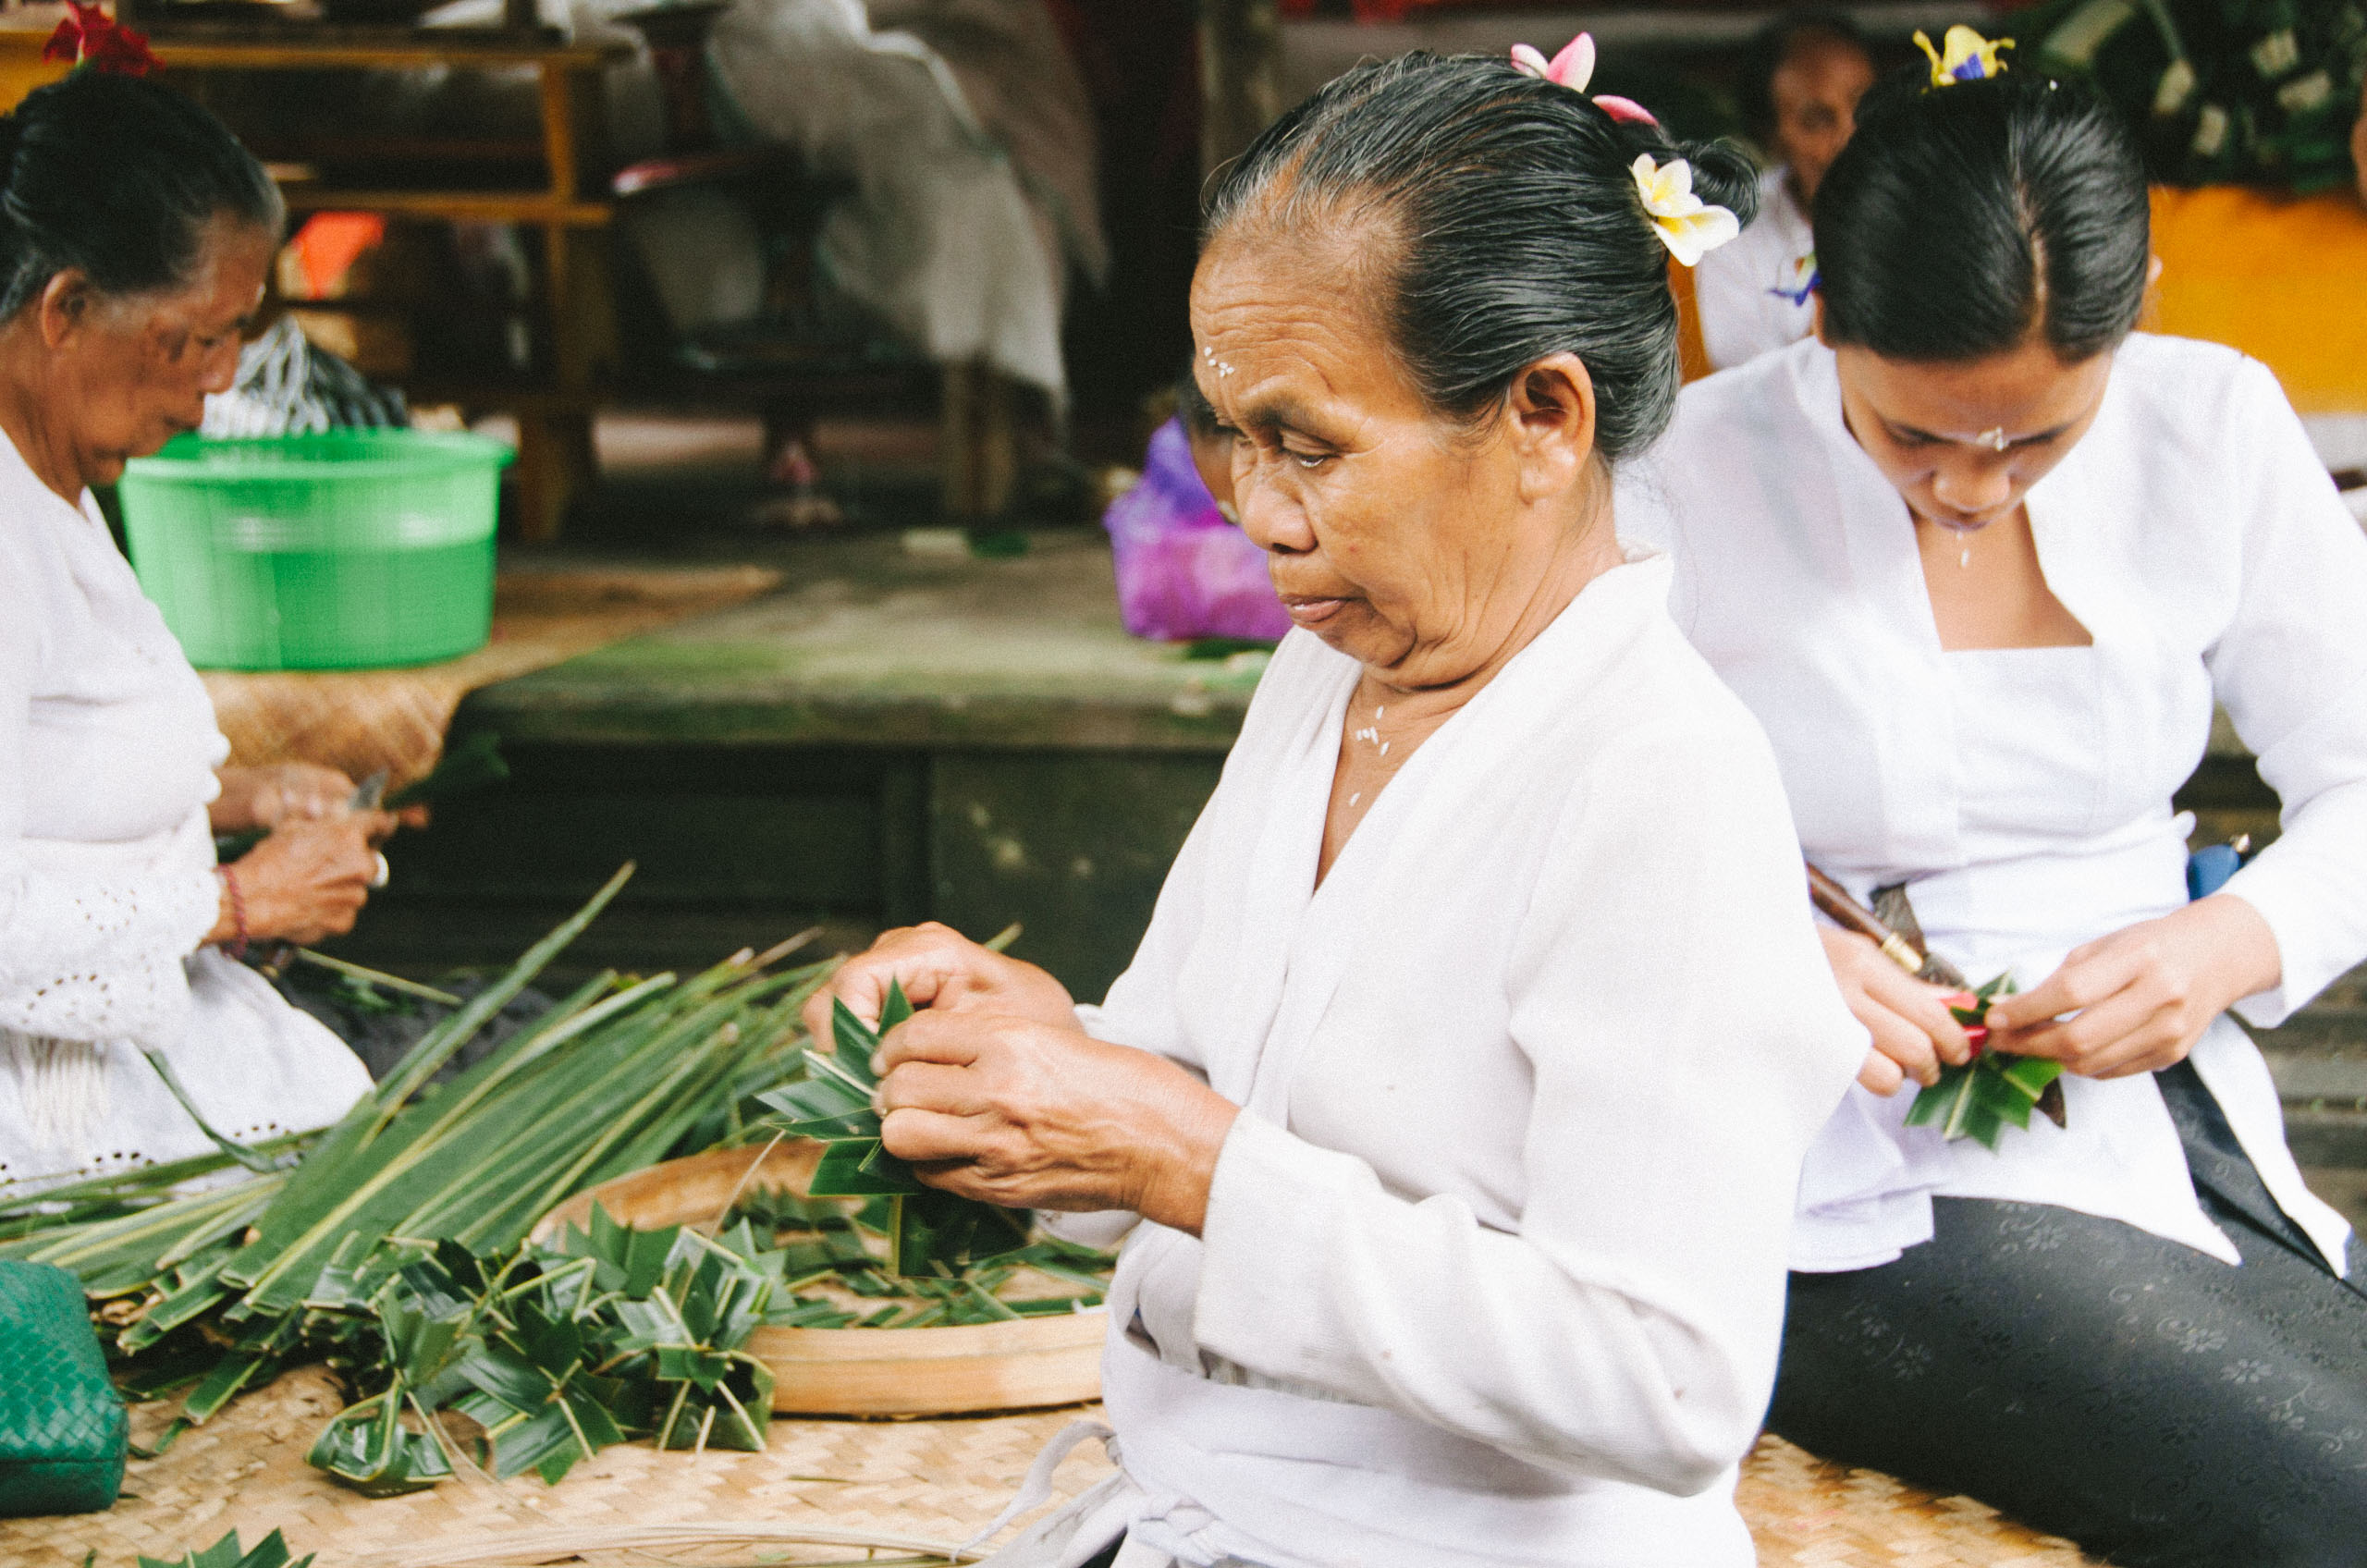 Women on the western edge of Bedulu Village preparing the special and often artistic offerings for their temple consisting of palm leaves, fruit, rice, sweets and incense.